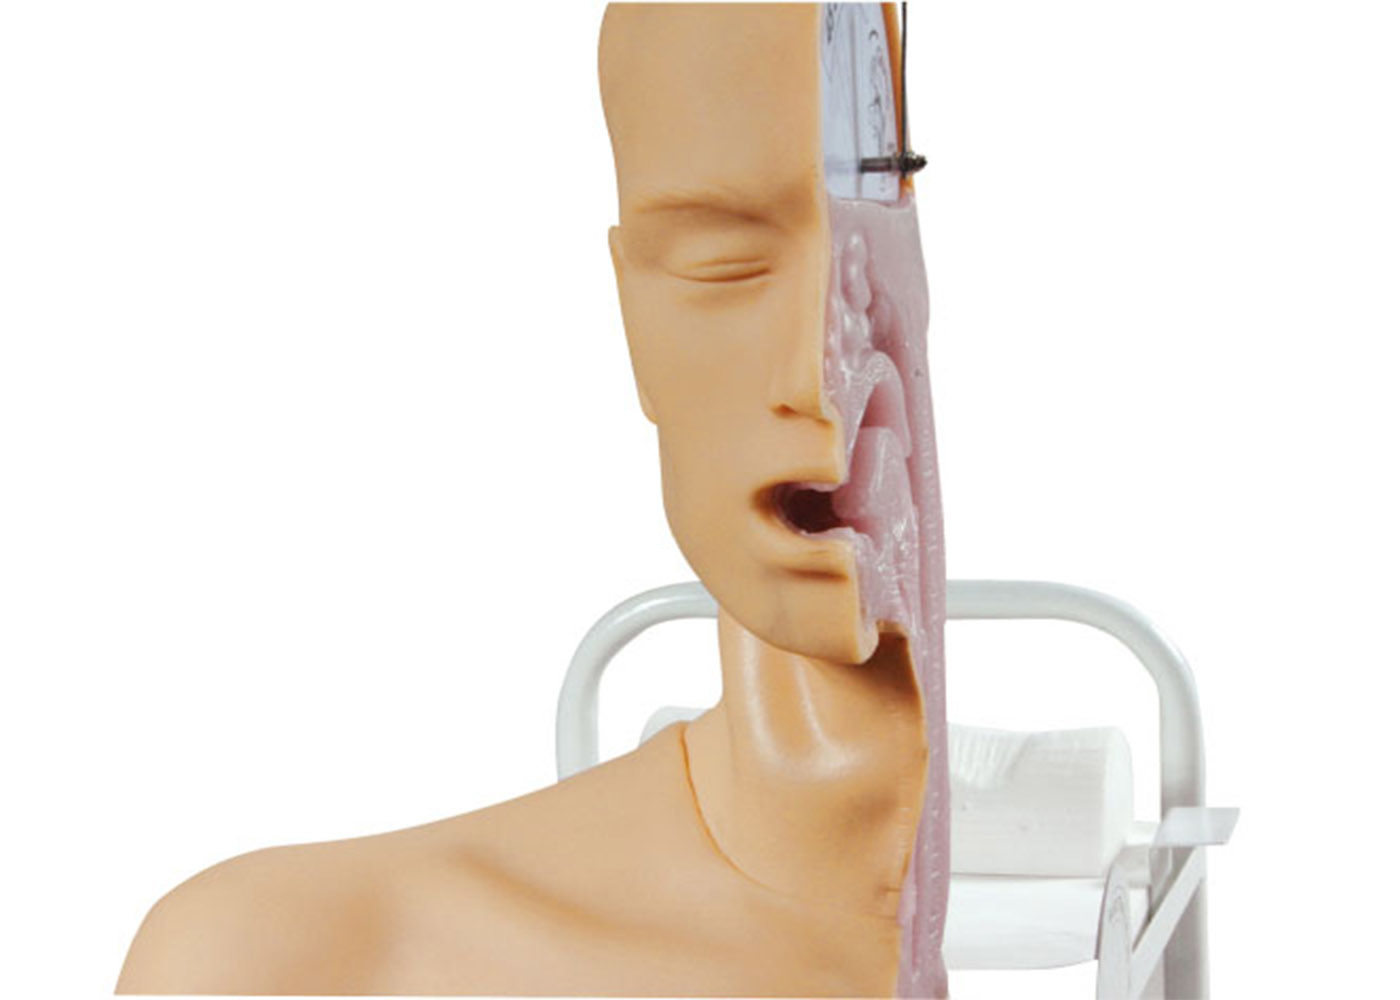 Swallow Mechanism Simulator clinical trial simulation for Learning and Training